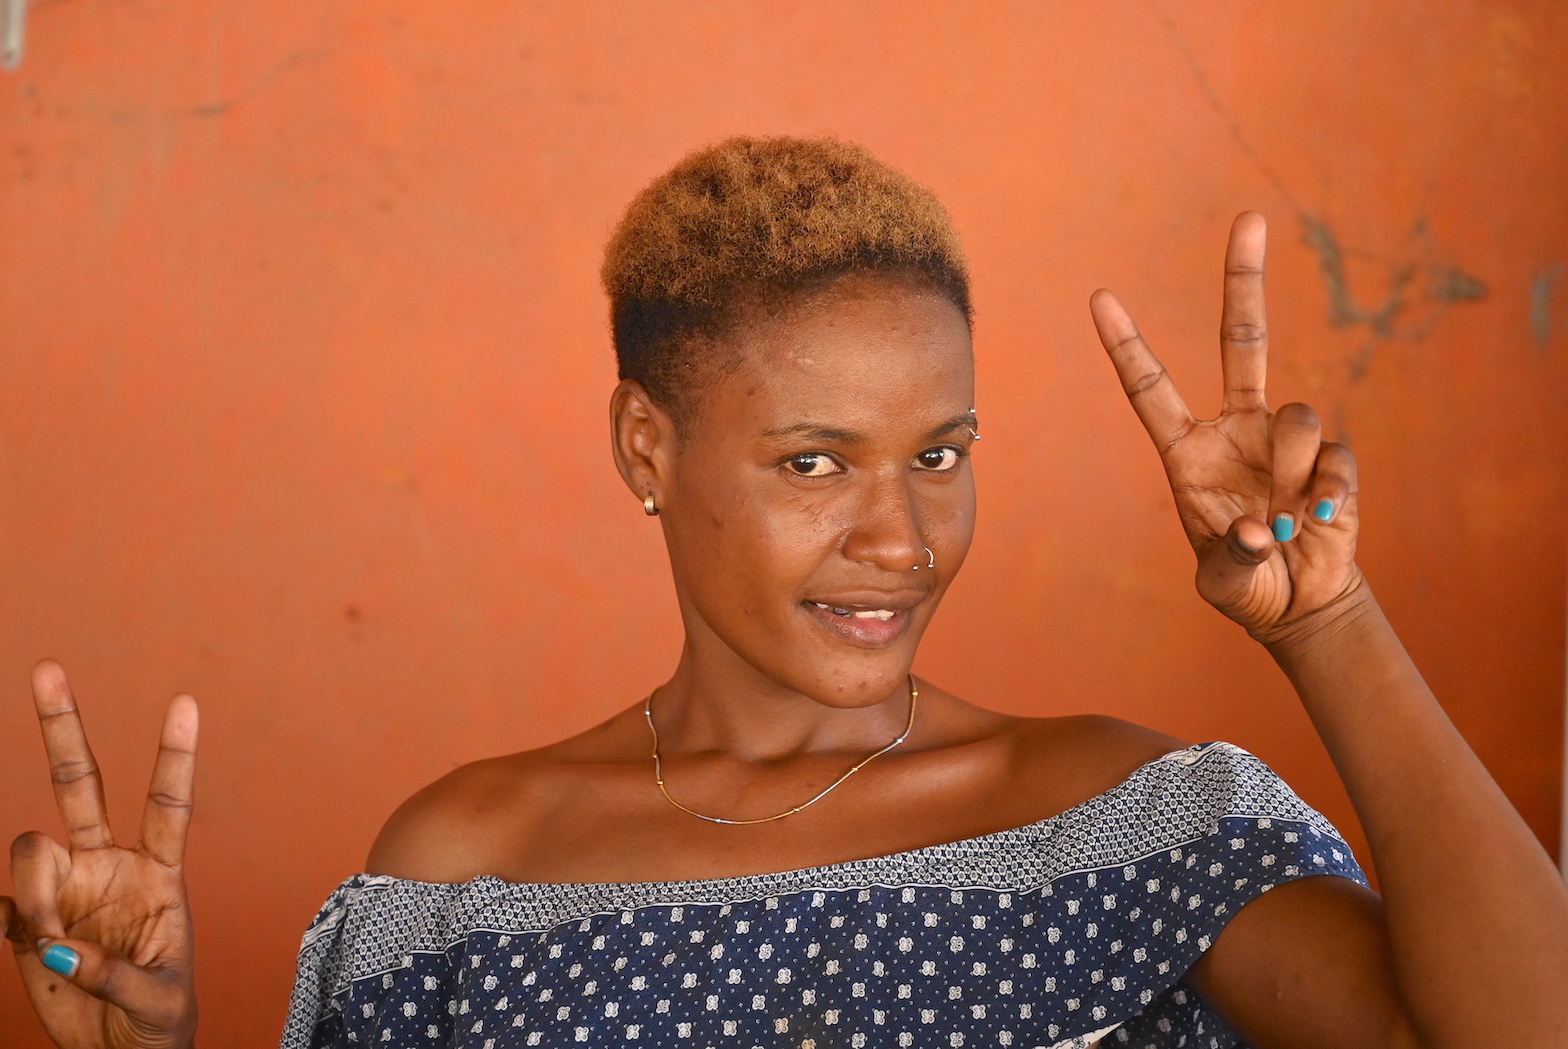 Jamillah is helping end HIV stigma in her community. She has inspired many young people to live positively with the disease and be able to attain their life goals. ©